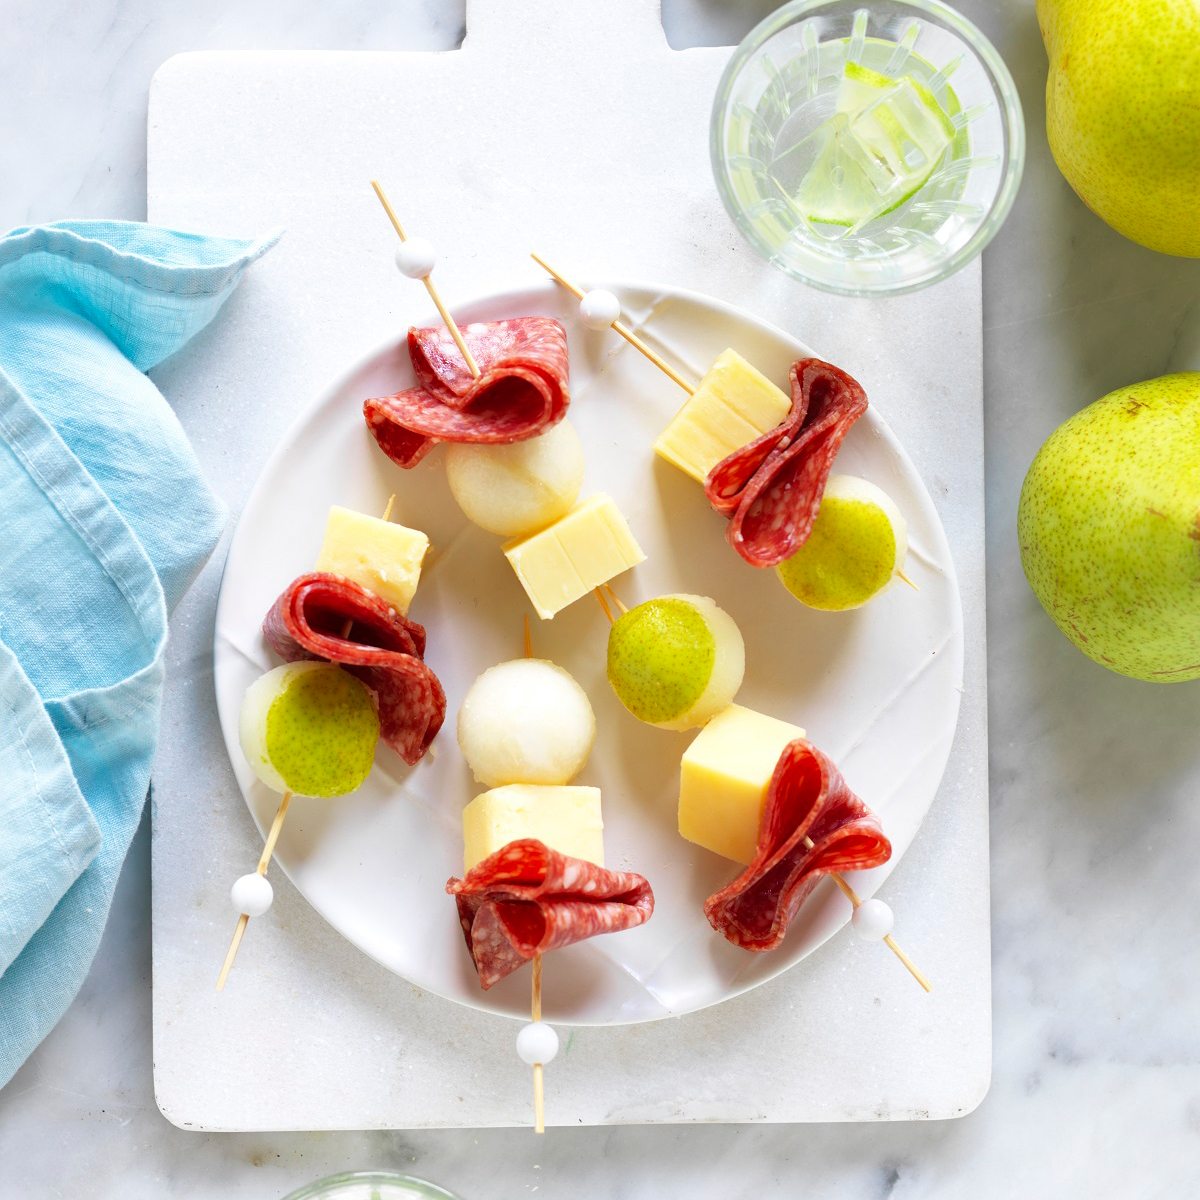 Pear, salami and cheese skewers